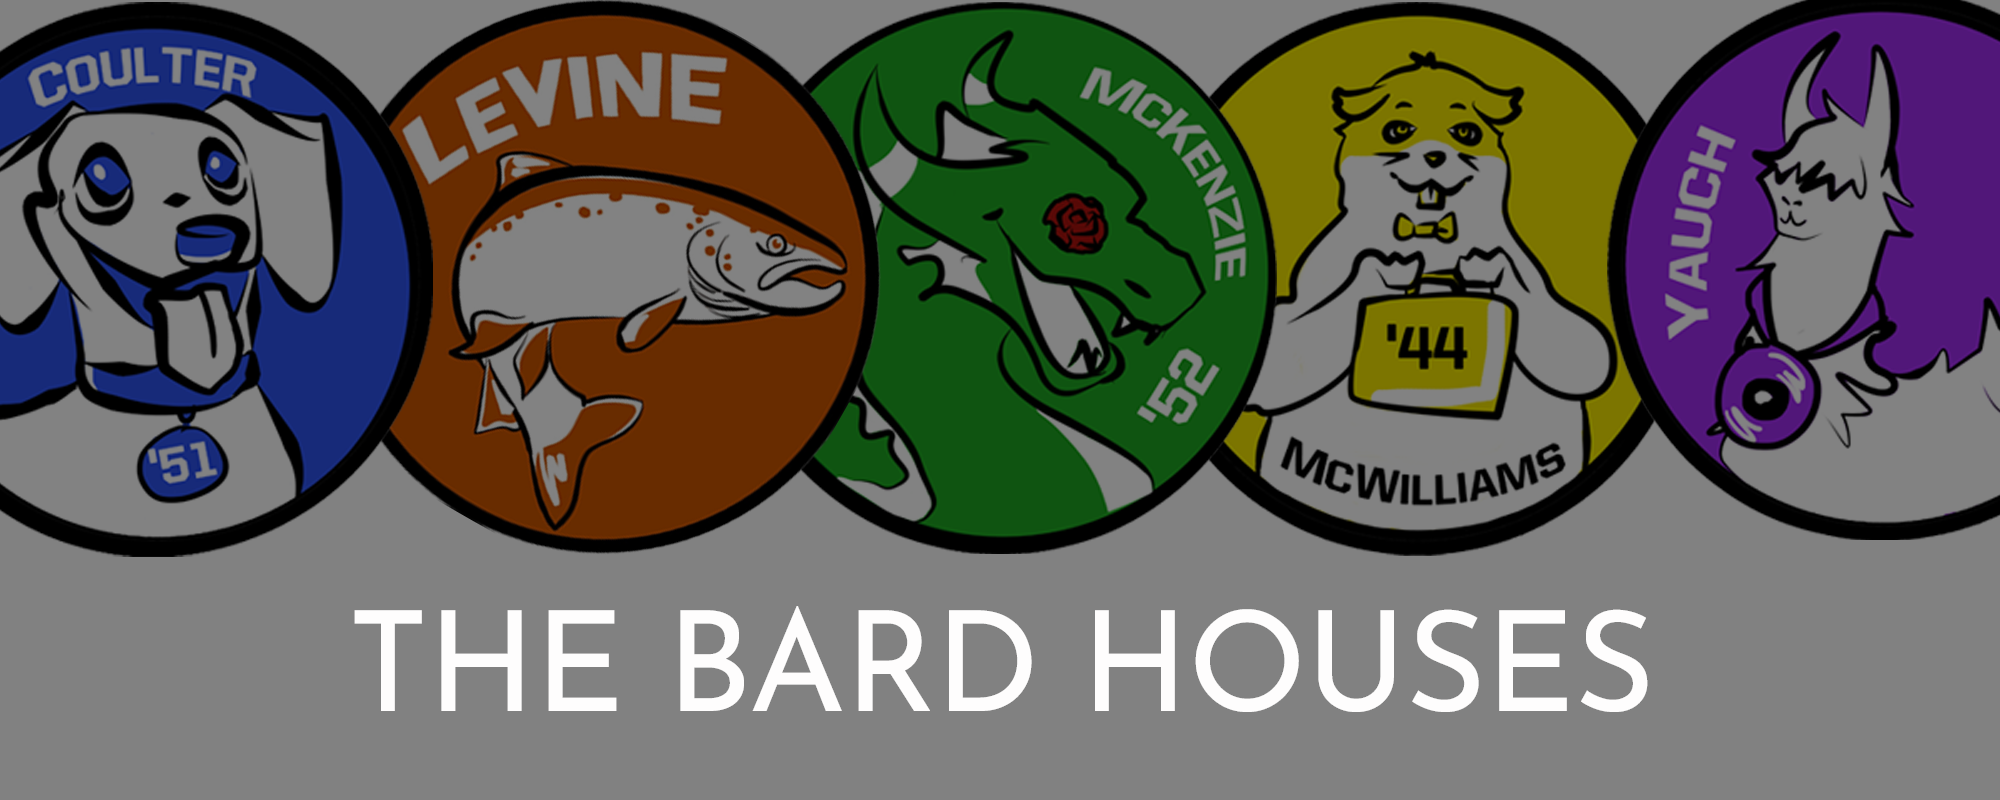 Main Image for The Bard Houses